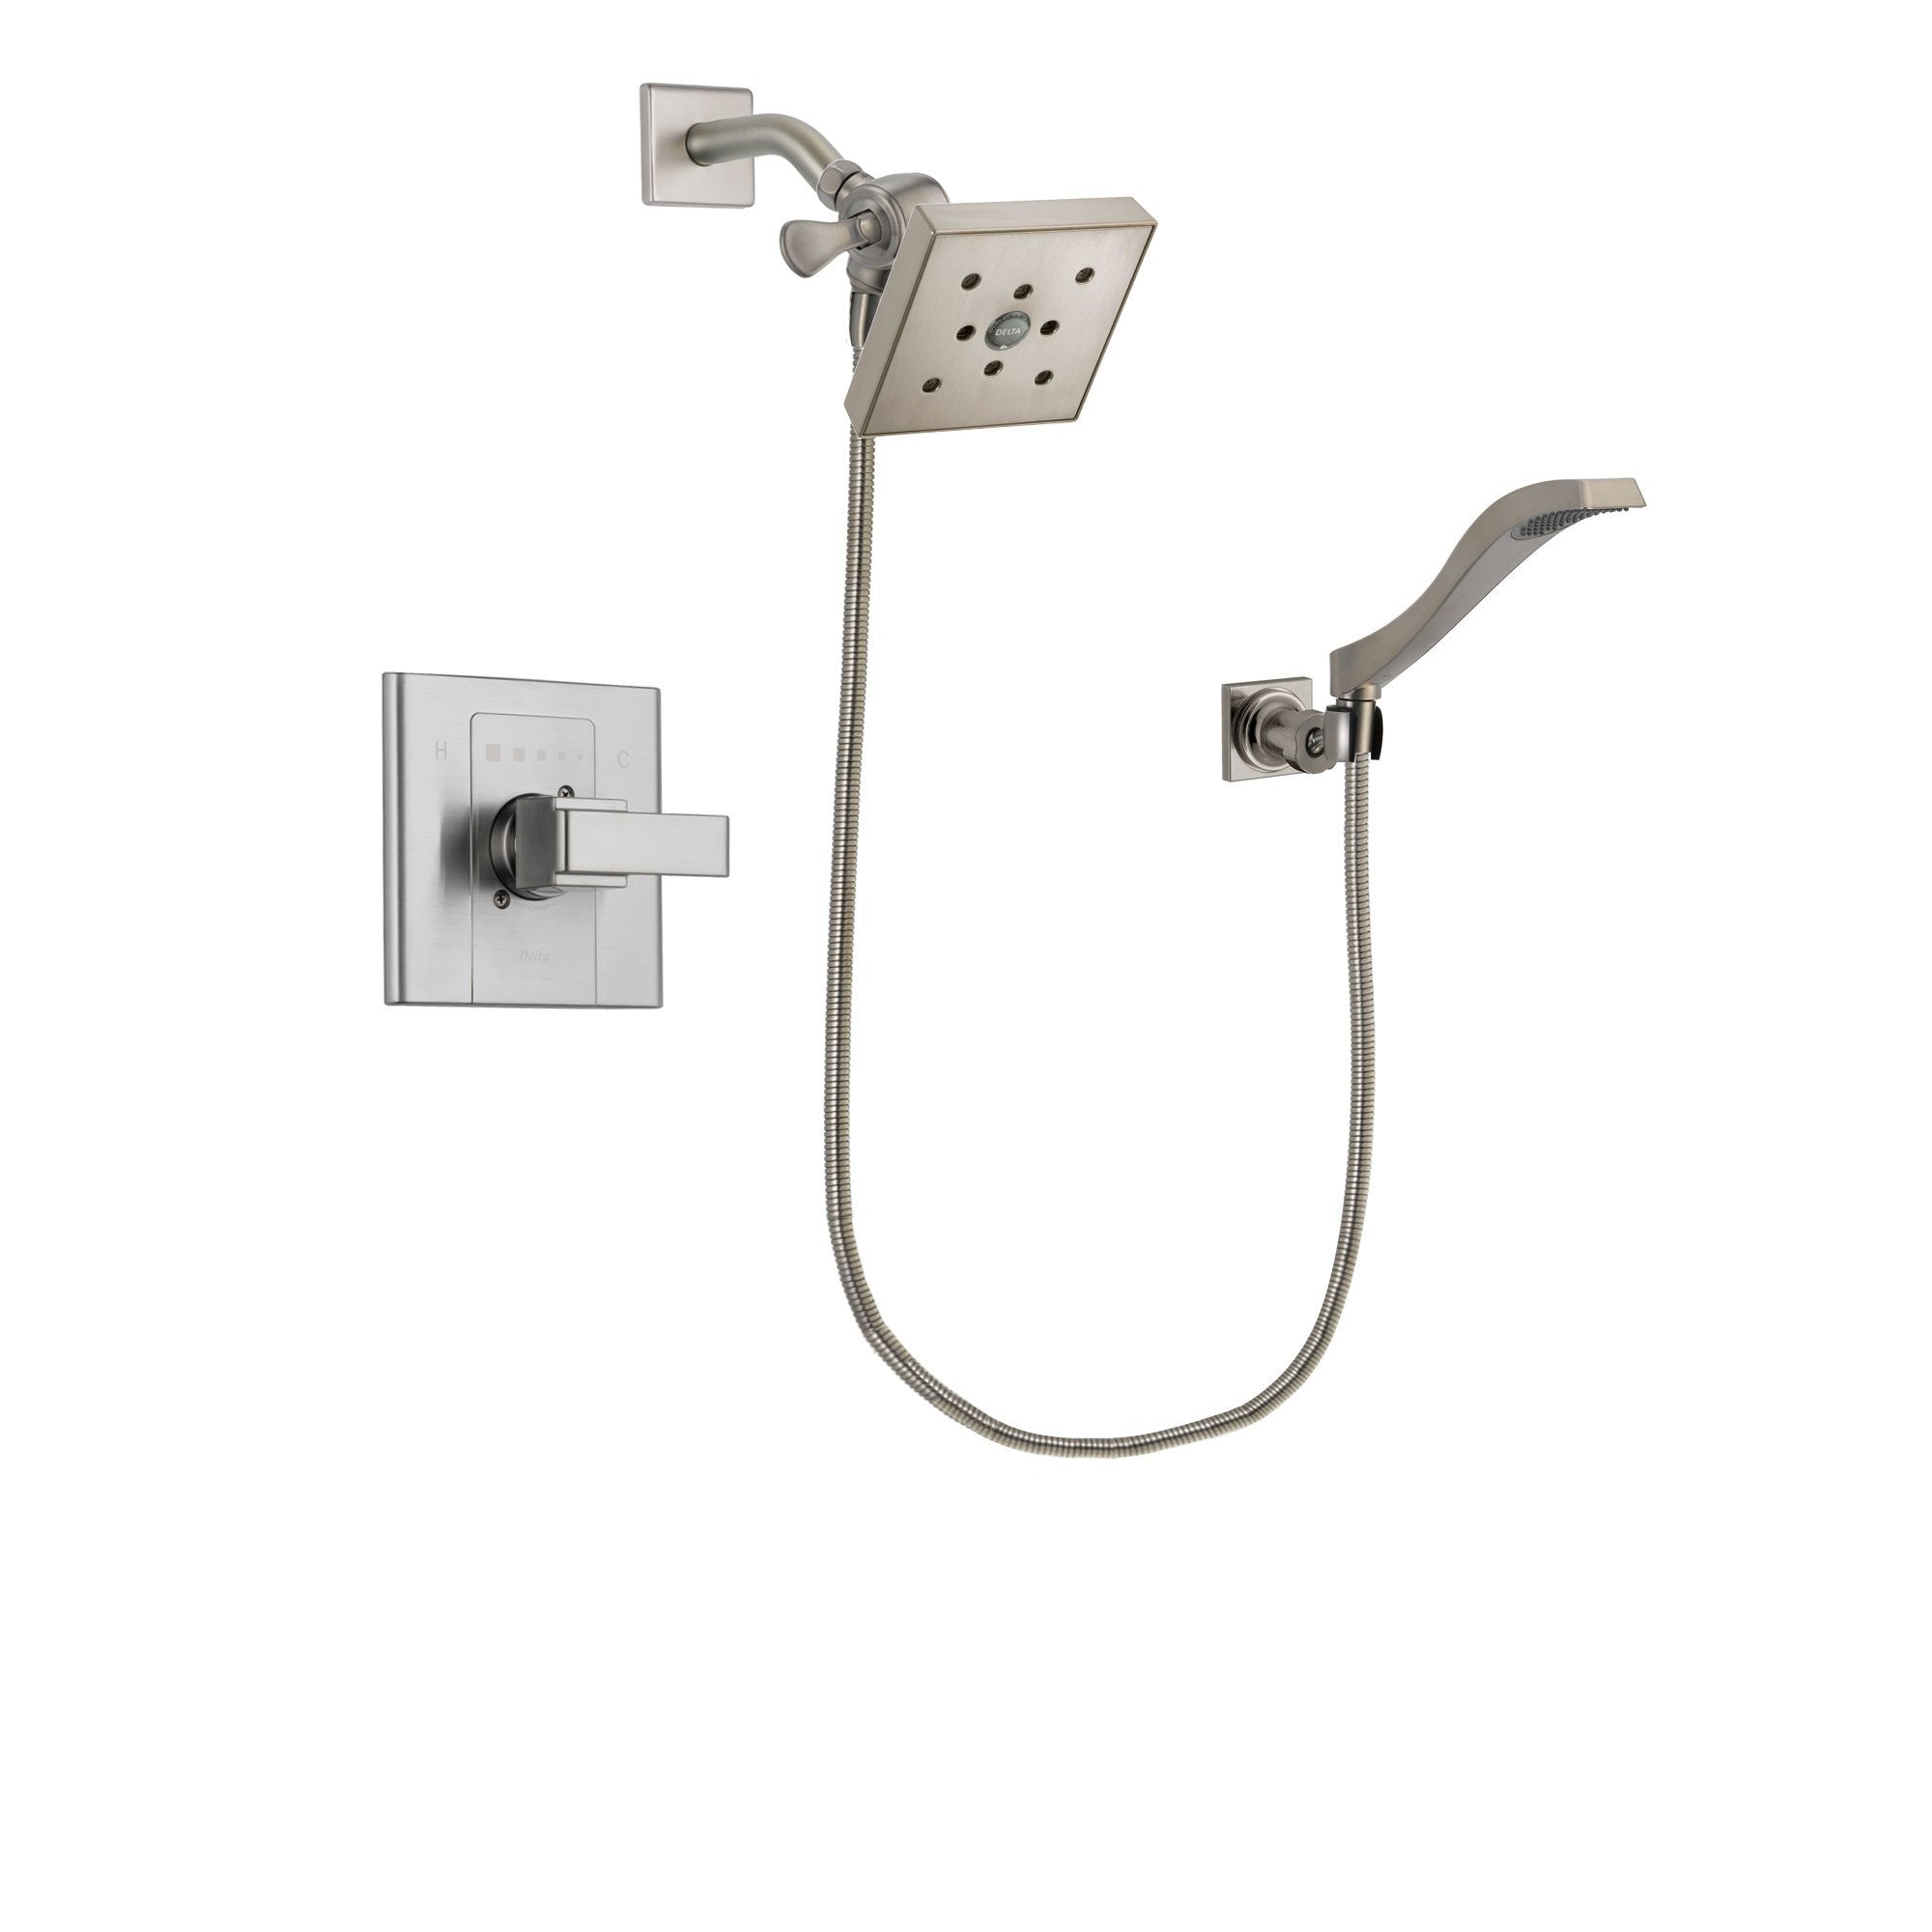 Delta Arzo Stainless Steel Finish Shower Faucet System Package with Square Shower Head and Modern Wall Mount Handheld Shower Spray Includes Rough-in Valve DSP2104V